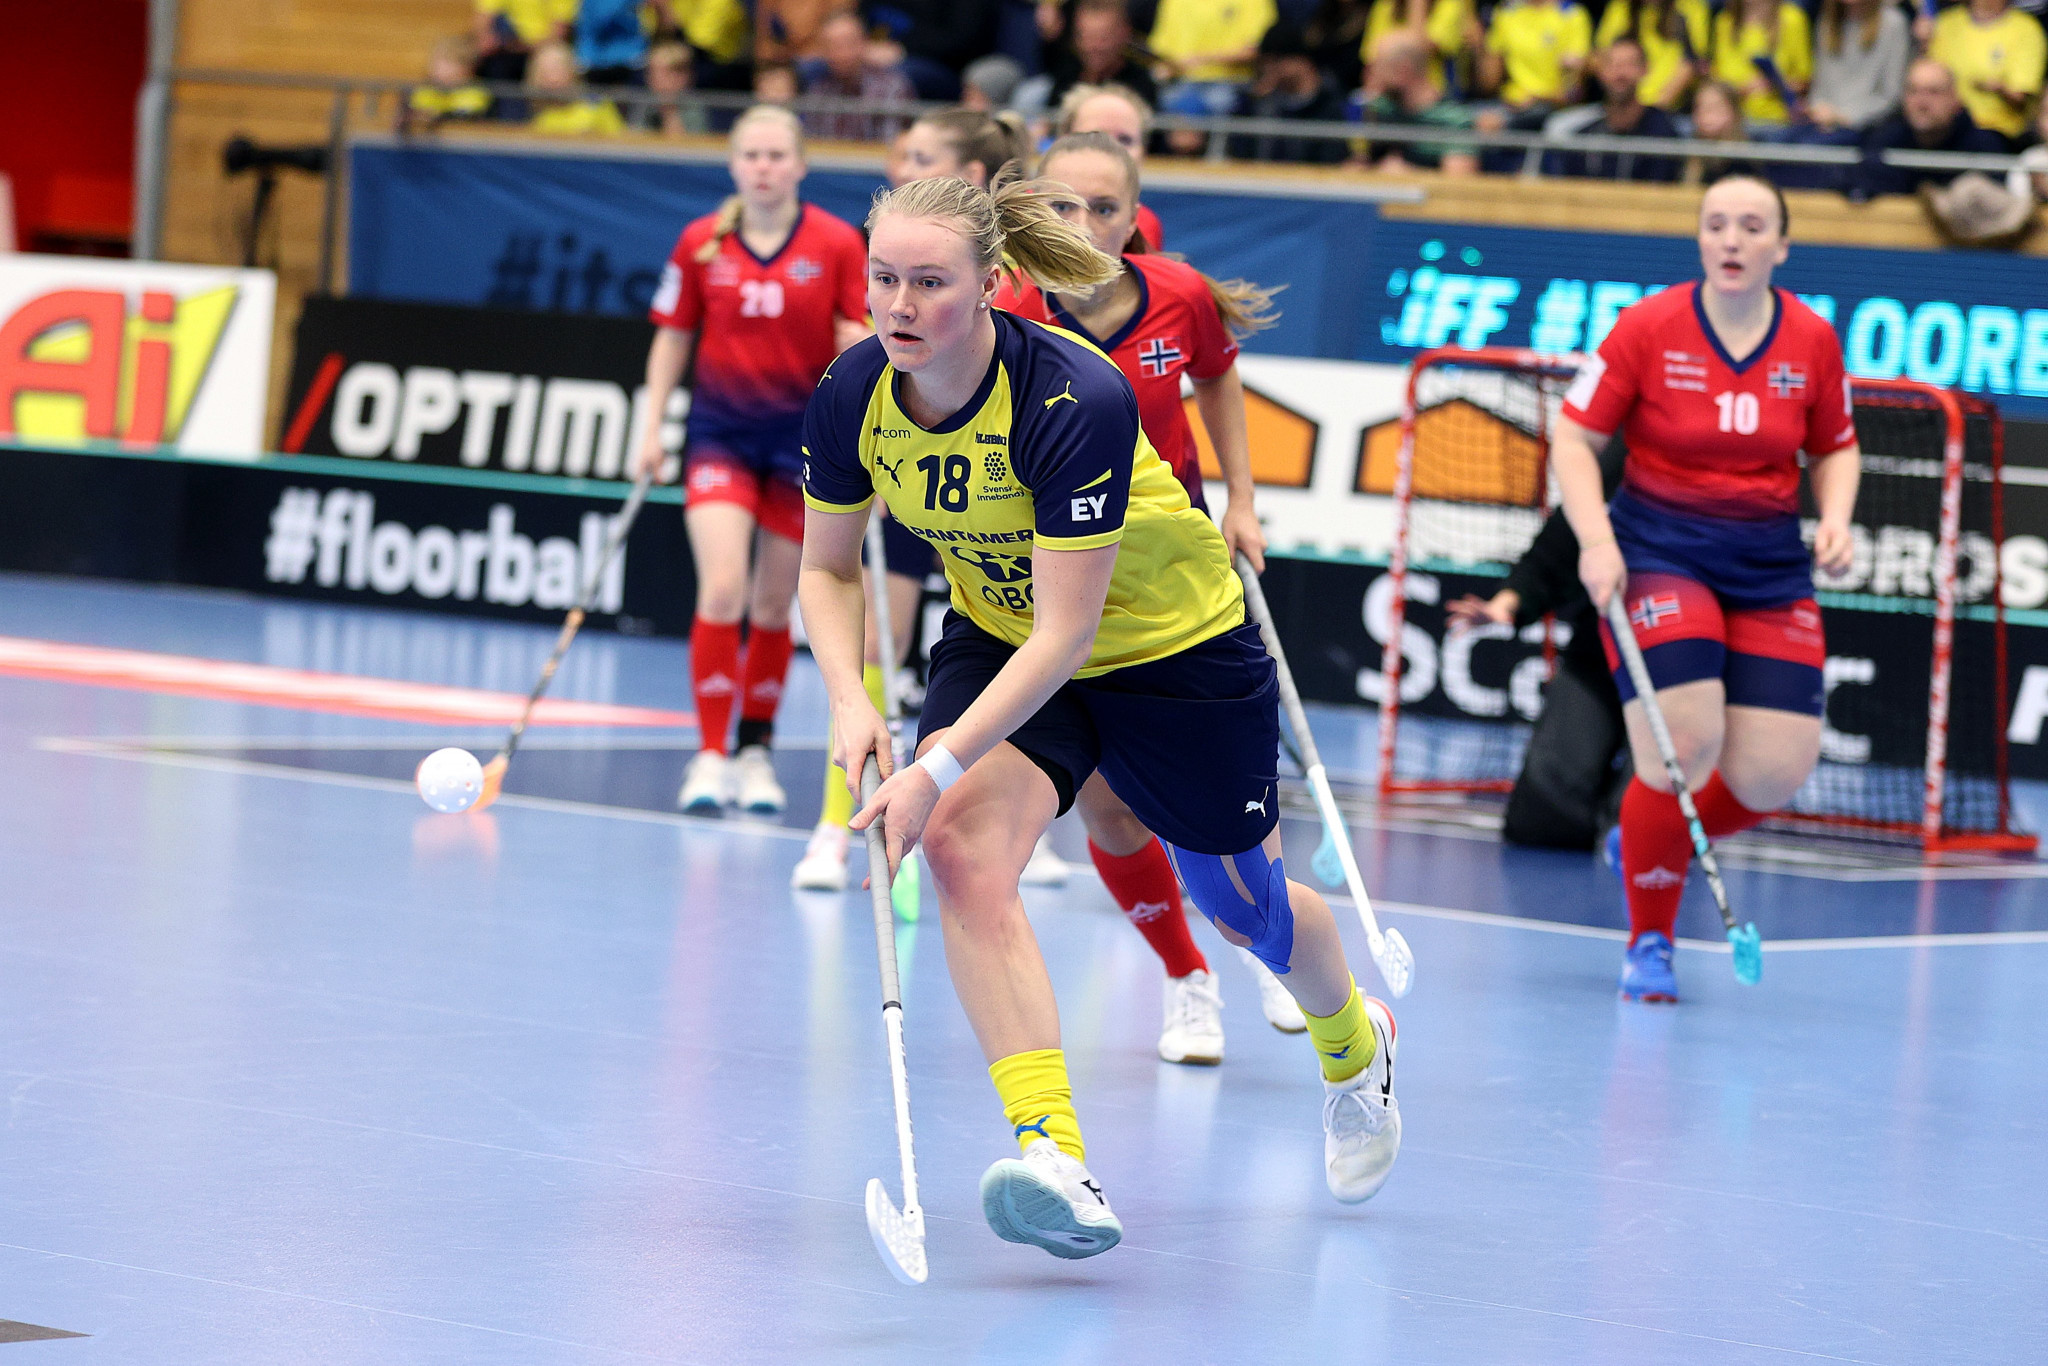 Sweden's pursuit of an eighth consecutive Women's World Floorball Championship remains on course ©IFF/Per Wiklund